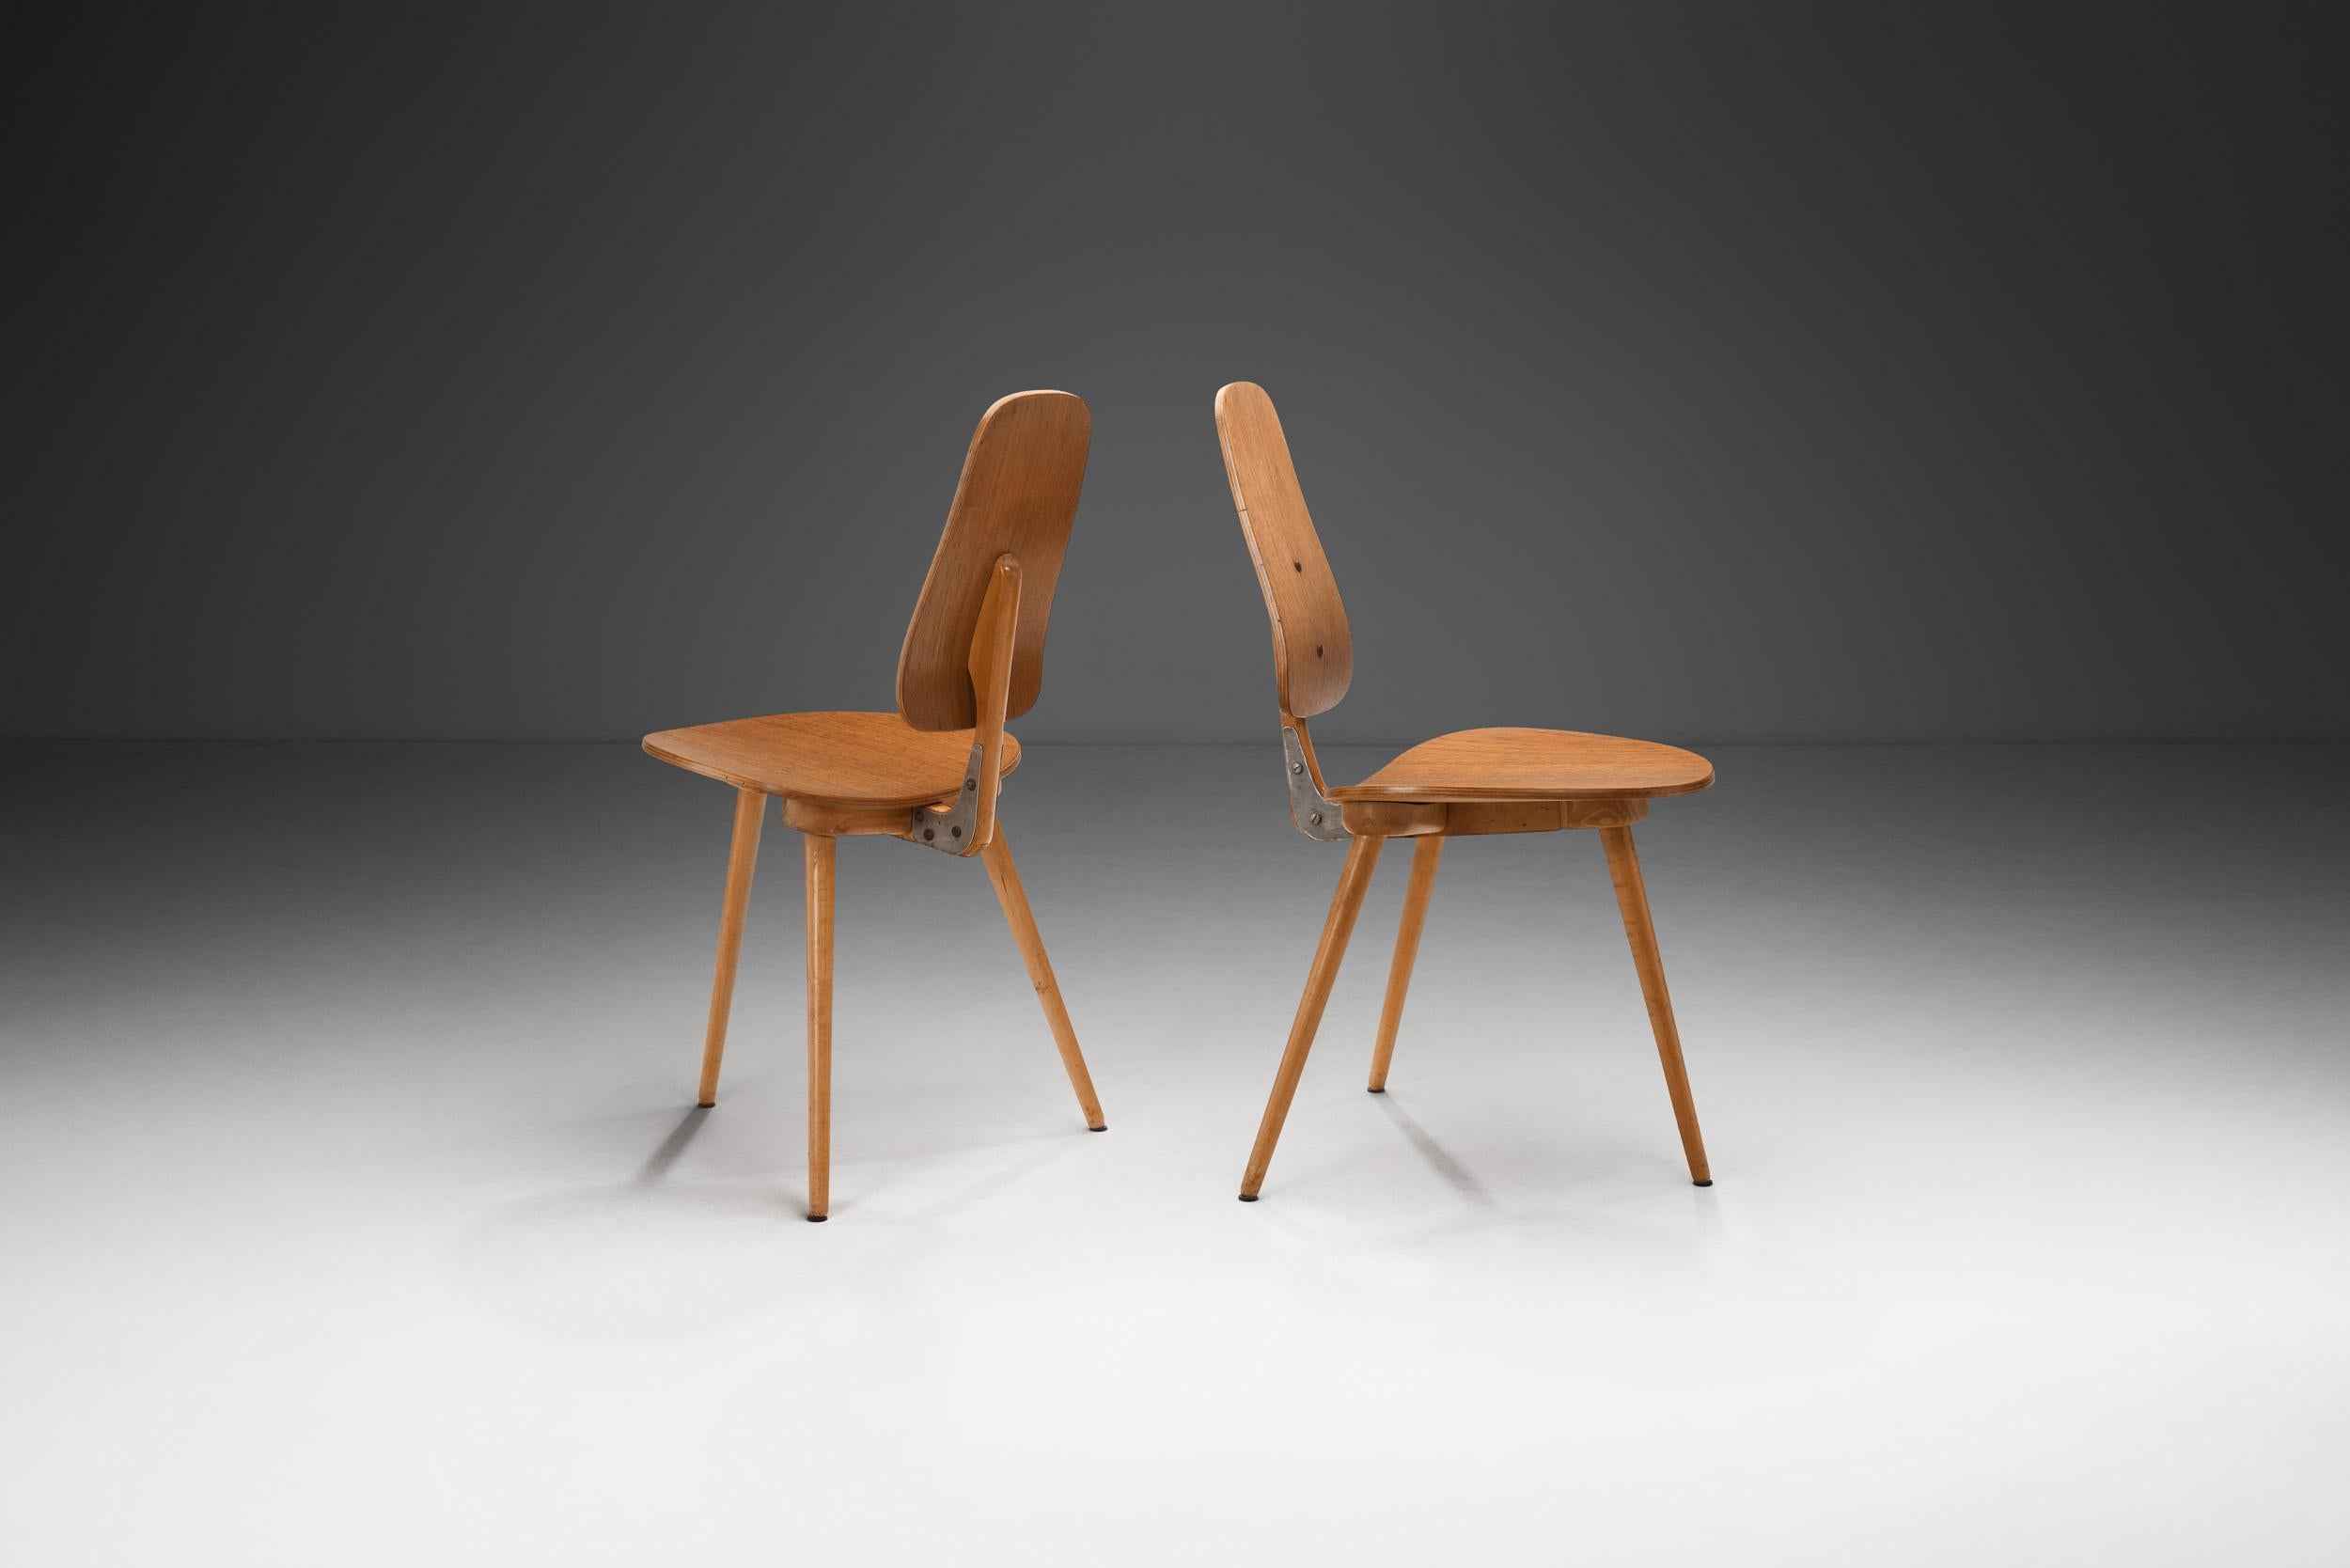 Laminated Pair of “Grill” Chairs by Bengt Ruda for Ikea, Sweden 1958 For Sale